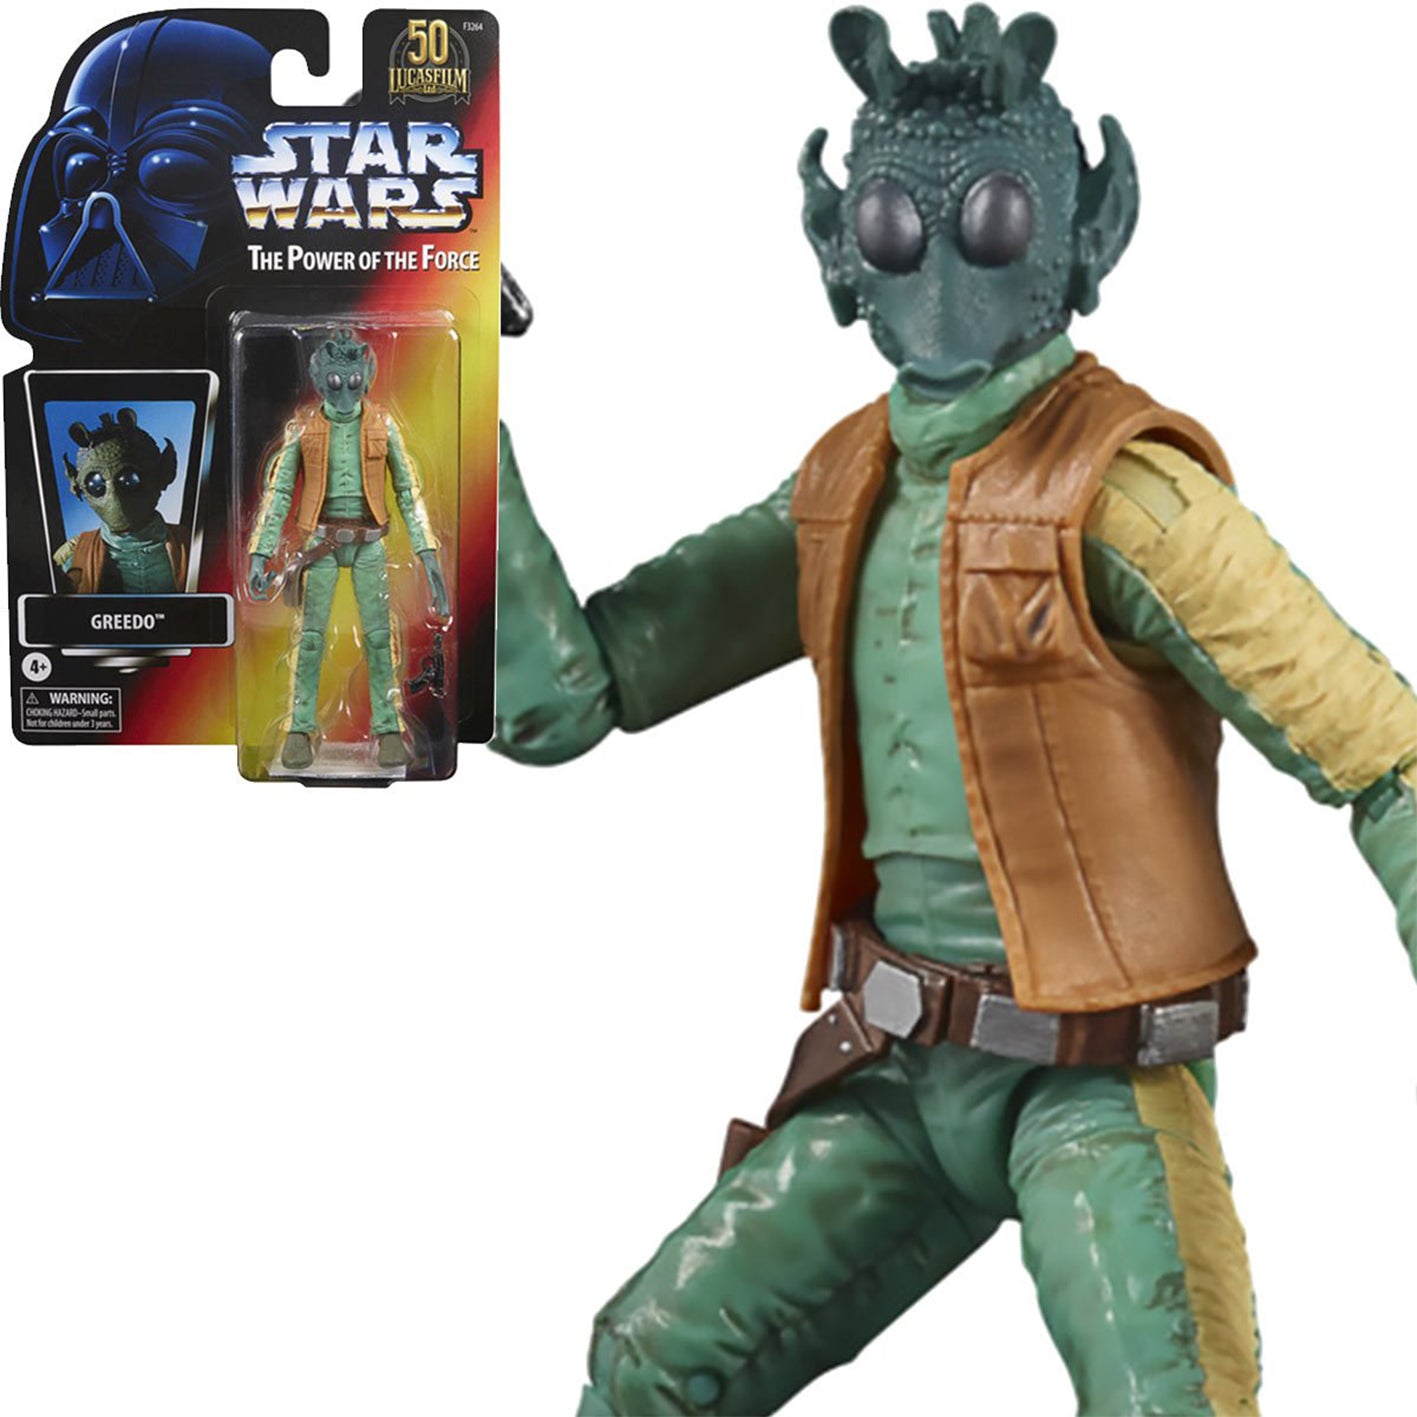 Greedo (The Power of the Force Edition), Star Wars: The Black Series, 6 pulgadas